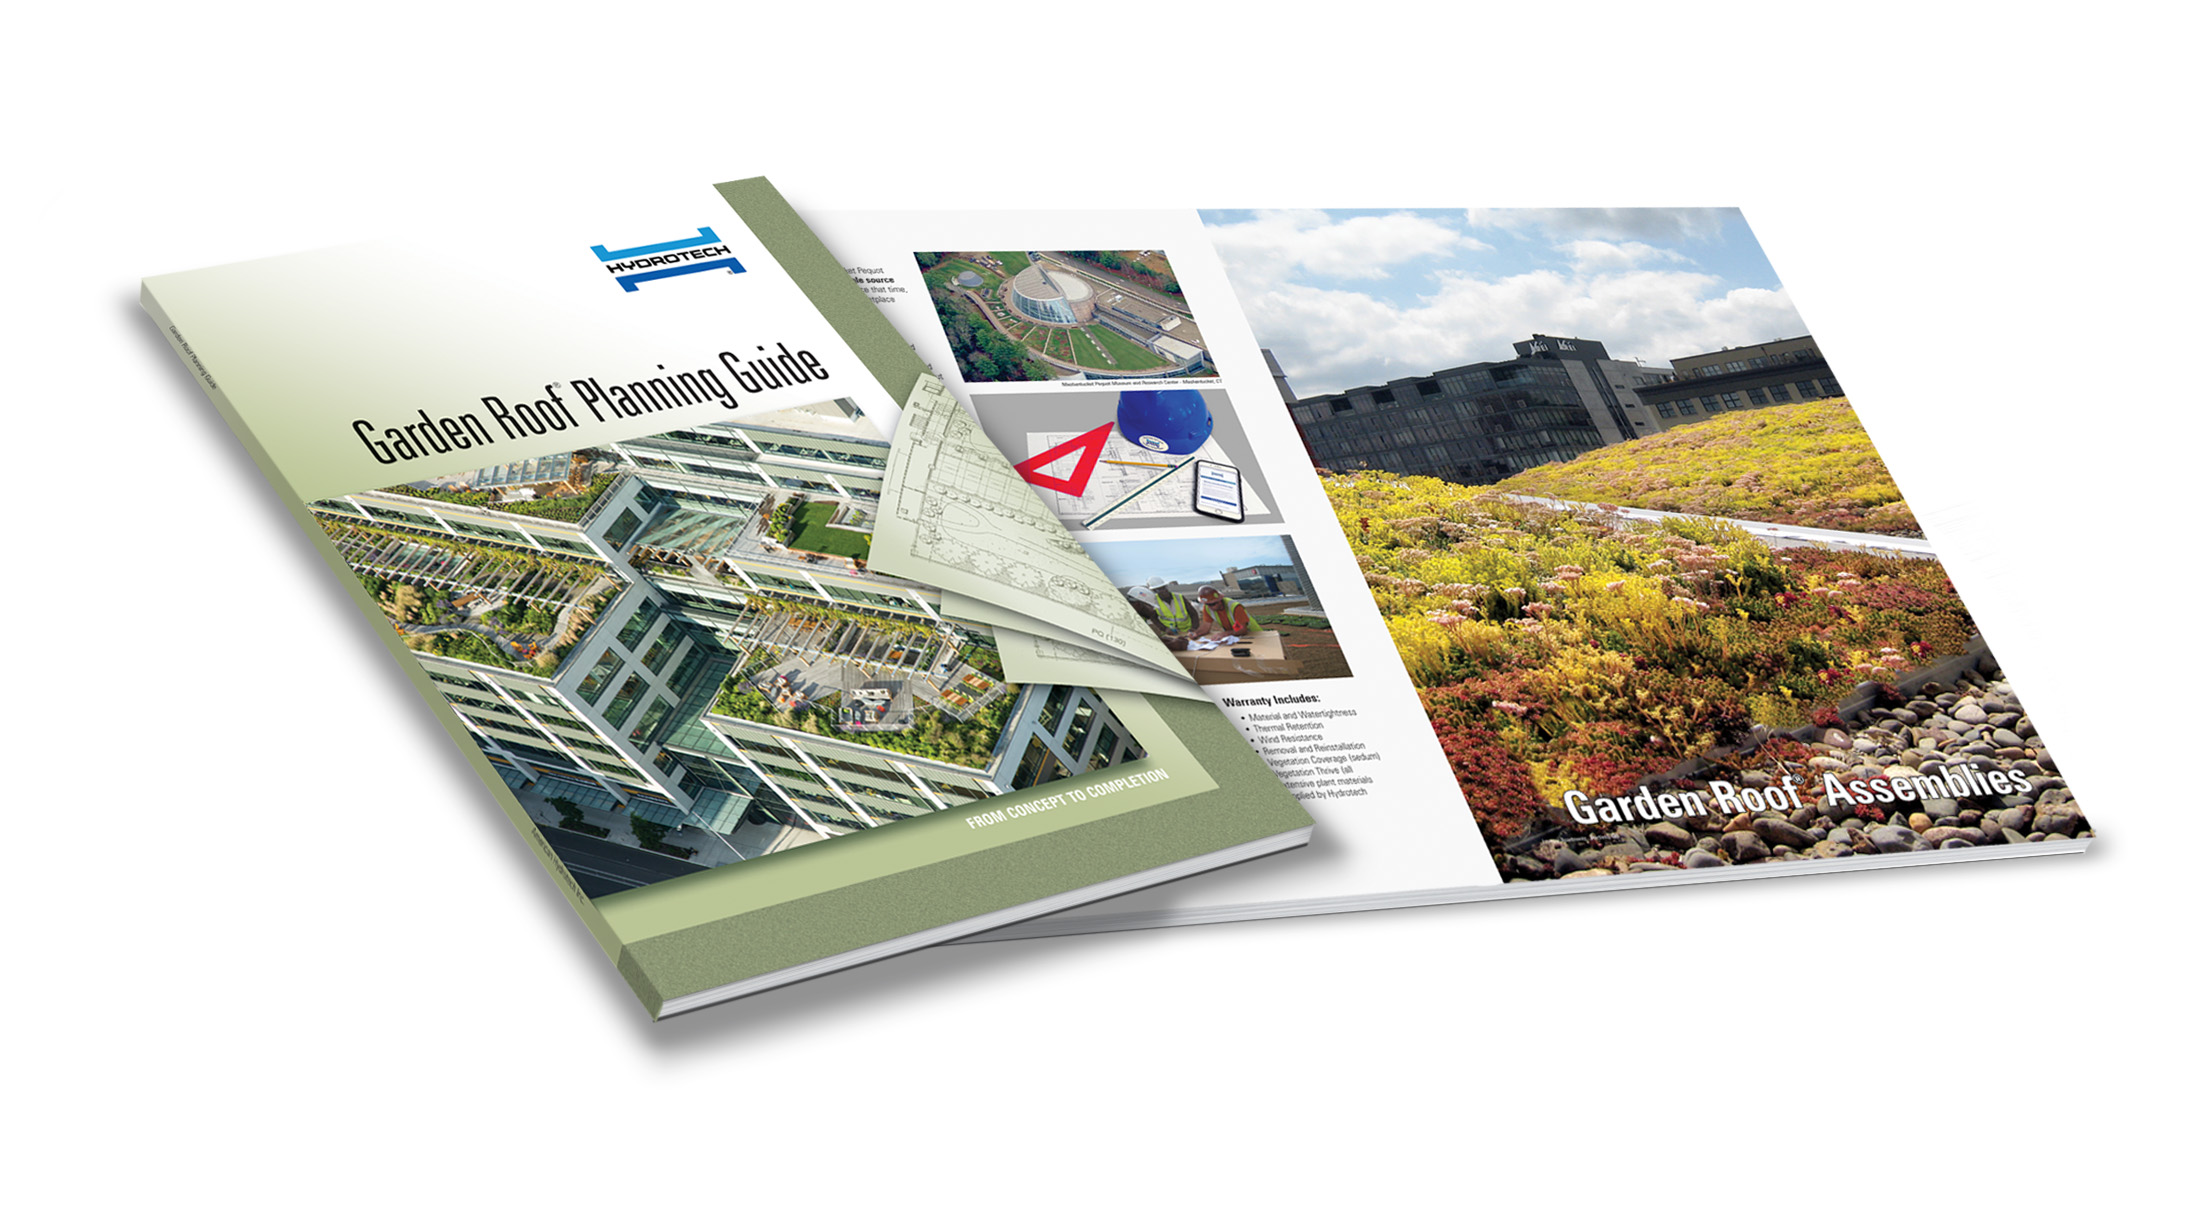 Fourth Edition of Garden Roof Planning Guide is an educational tool and resource for architects, facility management, building owners, installers and contractors on the latest technology, applications